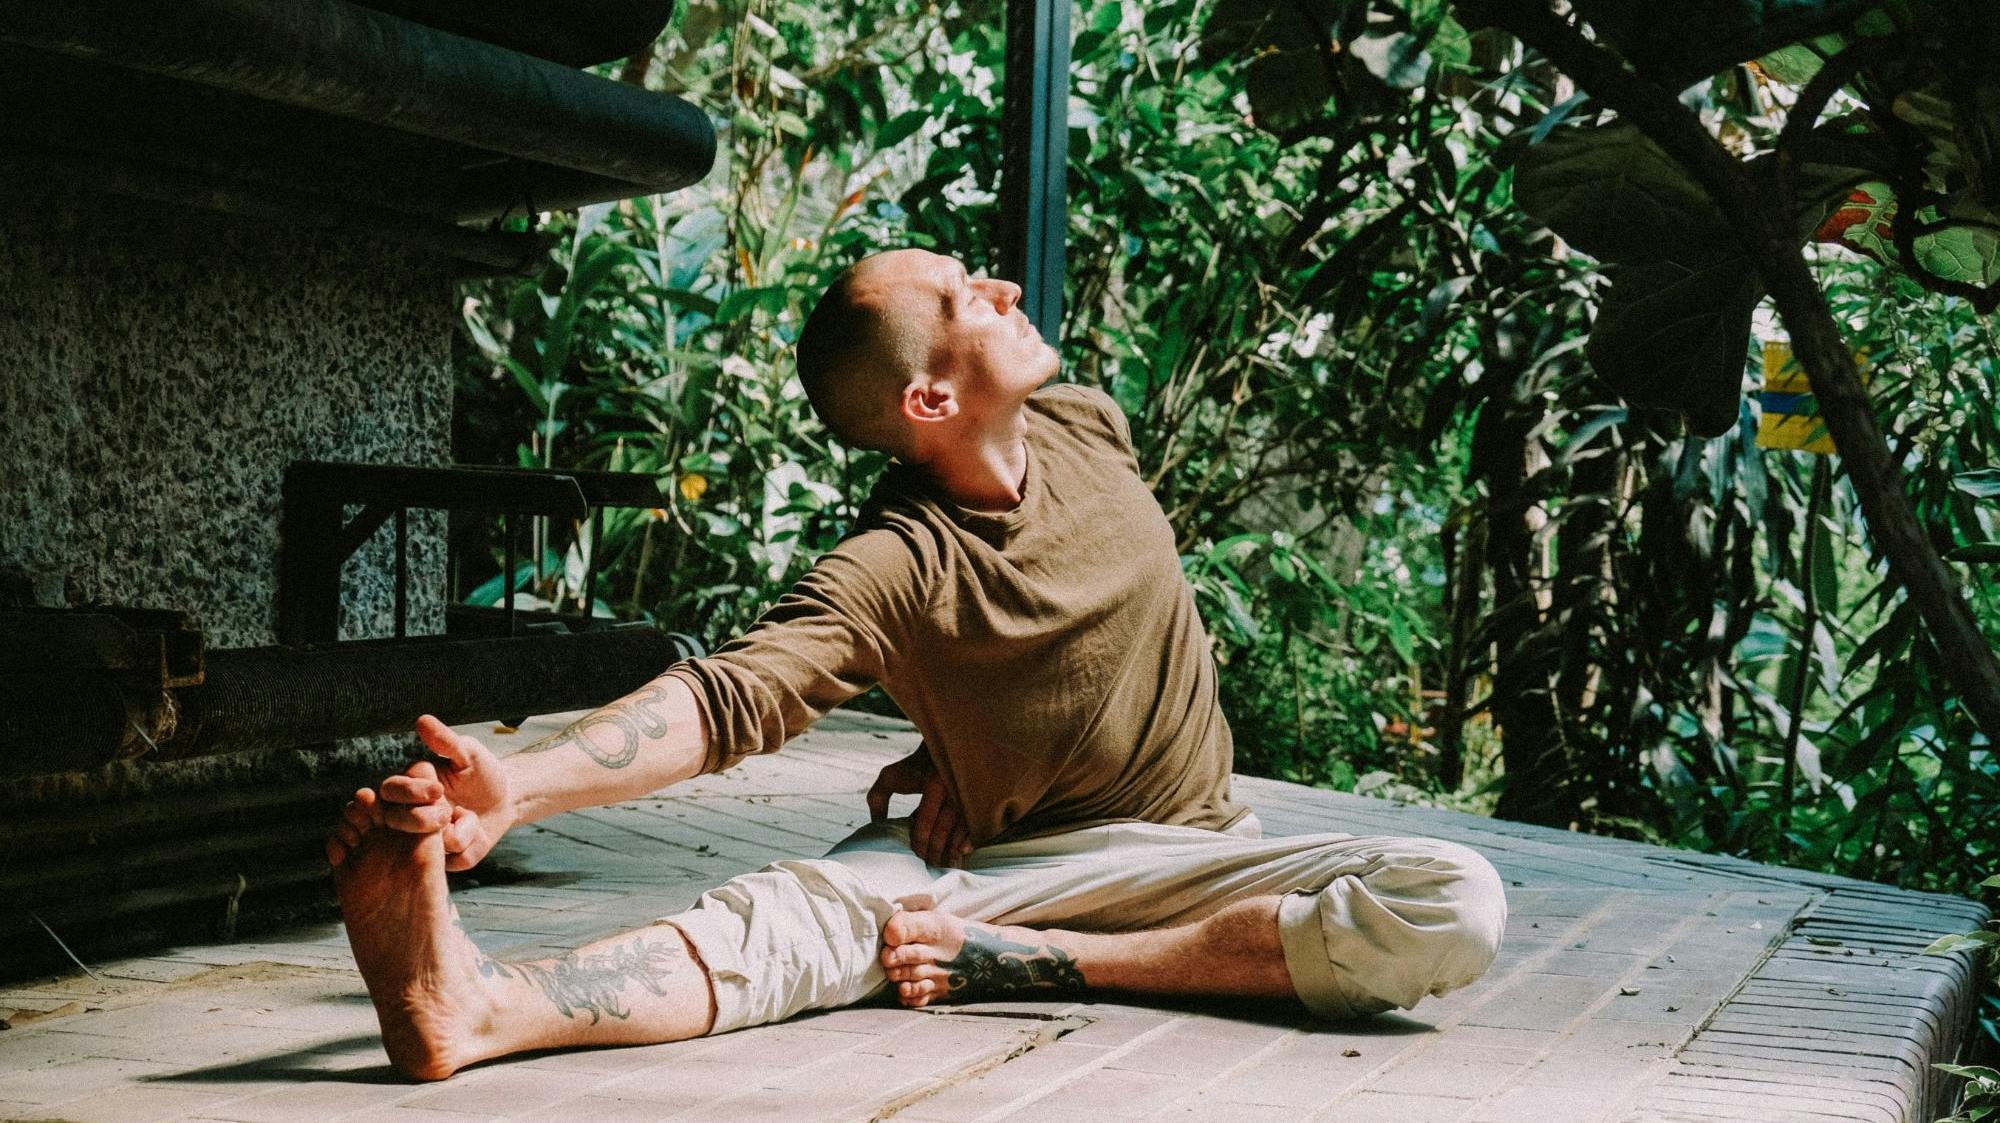 Man stretches while sitting in a meditative state.